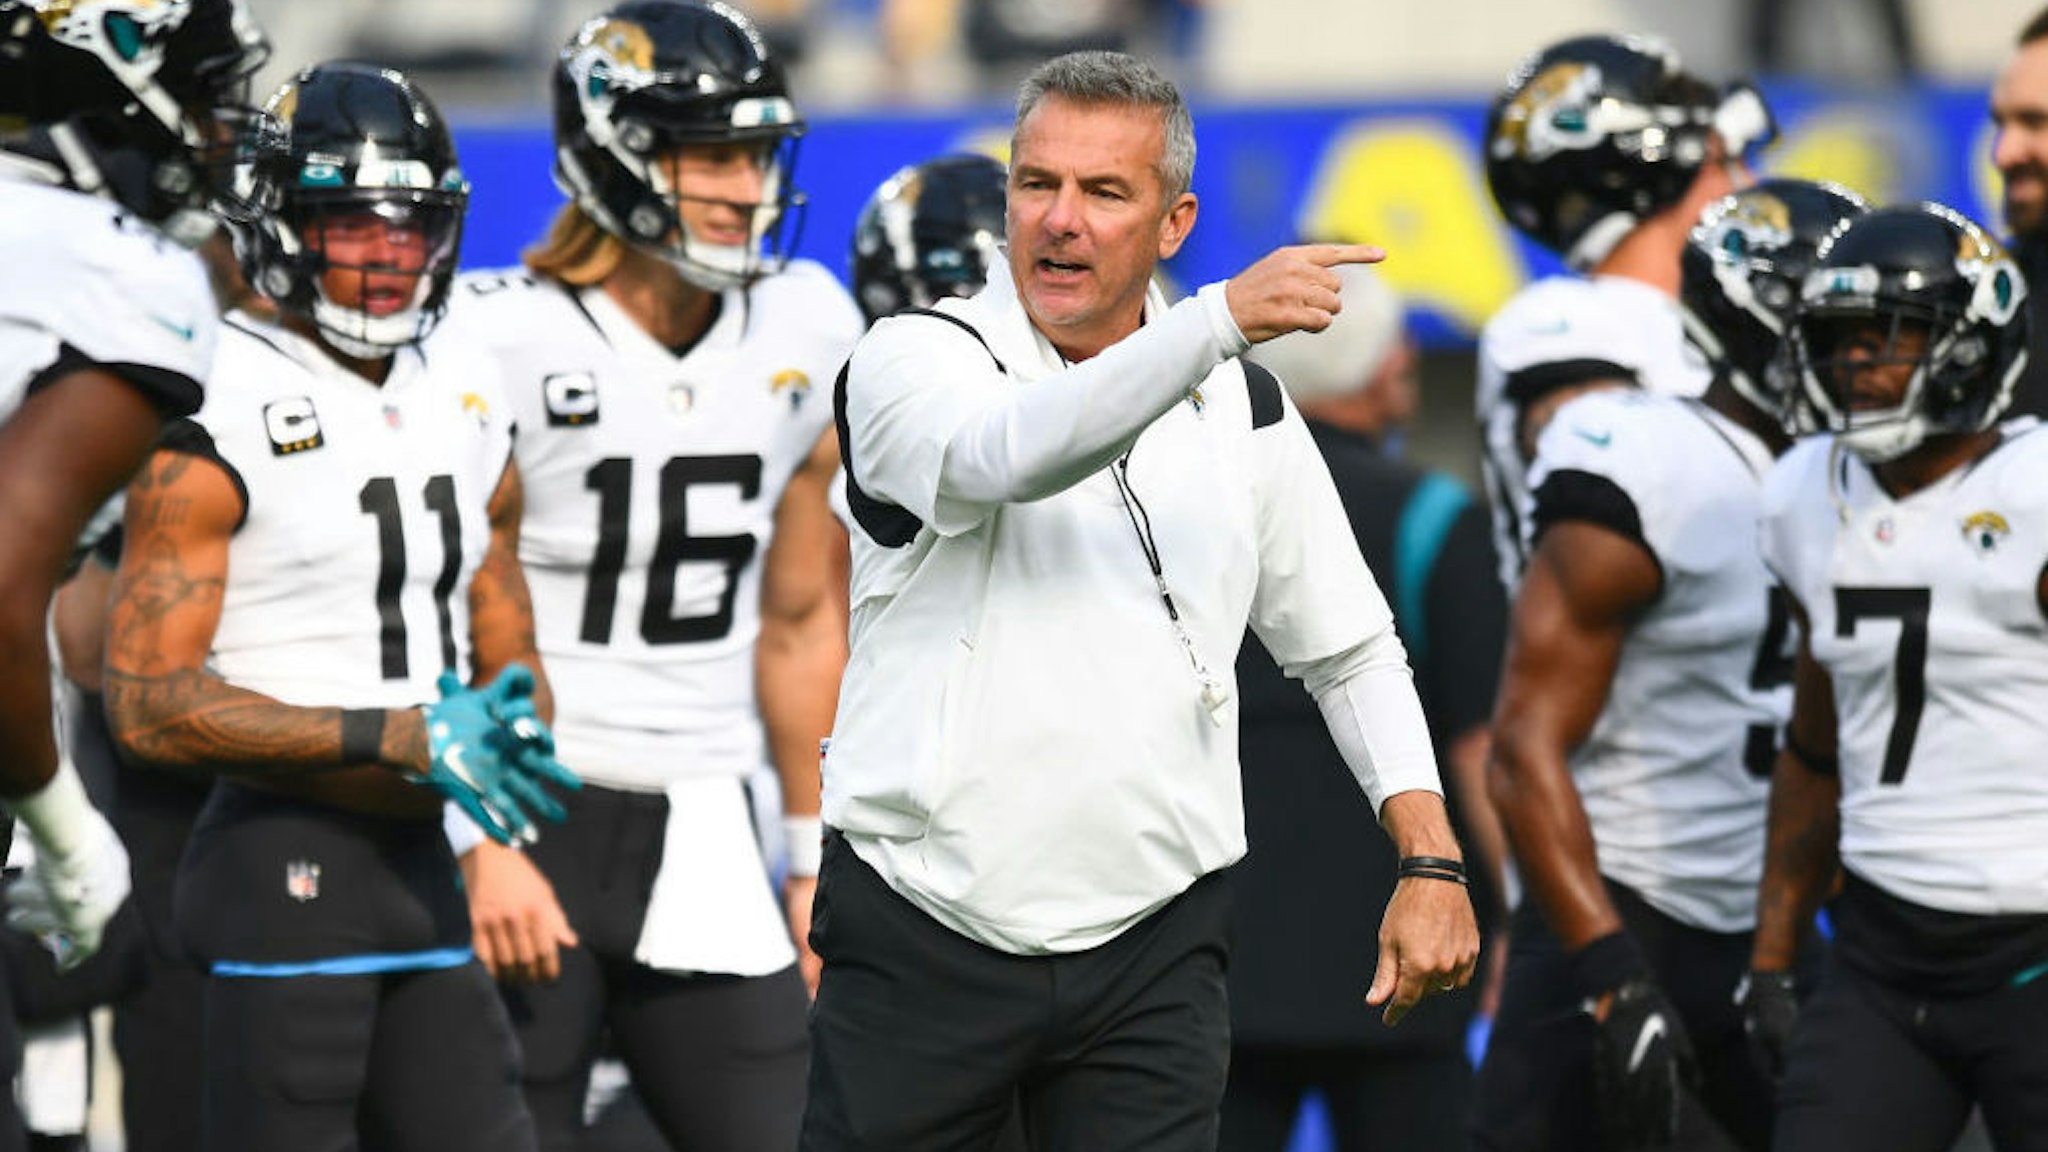 INGLEWOOD, CA - DECEMBER 05: Jacksonville Jaguars head coach Urban Meyer shouts out instructions before the NFL game between the Jacksonville Jaguars and the Los Angeles Rams on December 5, 2021, at SoFi Stadium in Inglewood, CA. (Photo by Brian Rothmuller/Icon Sportswire via Getty Images)